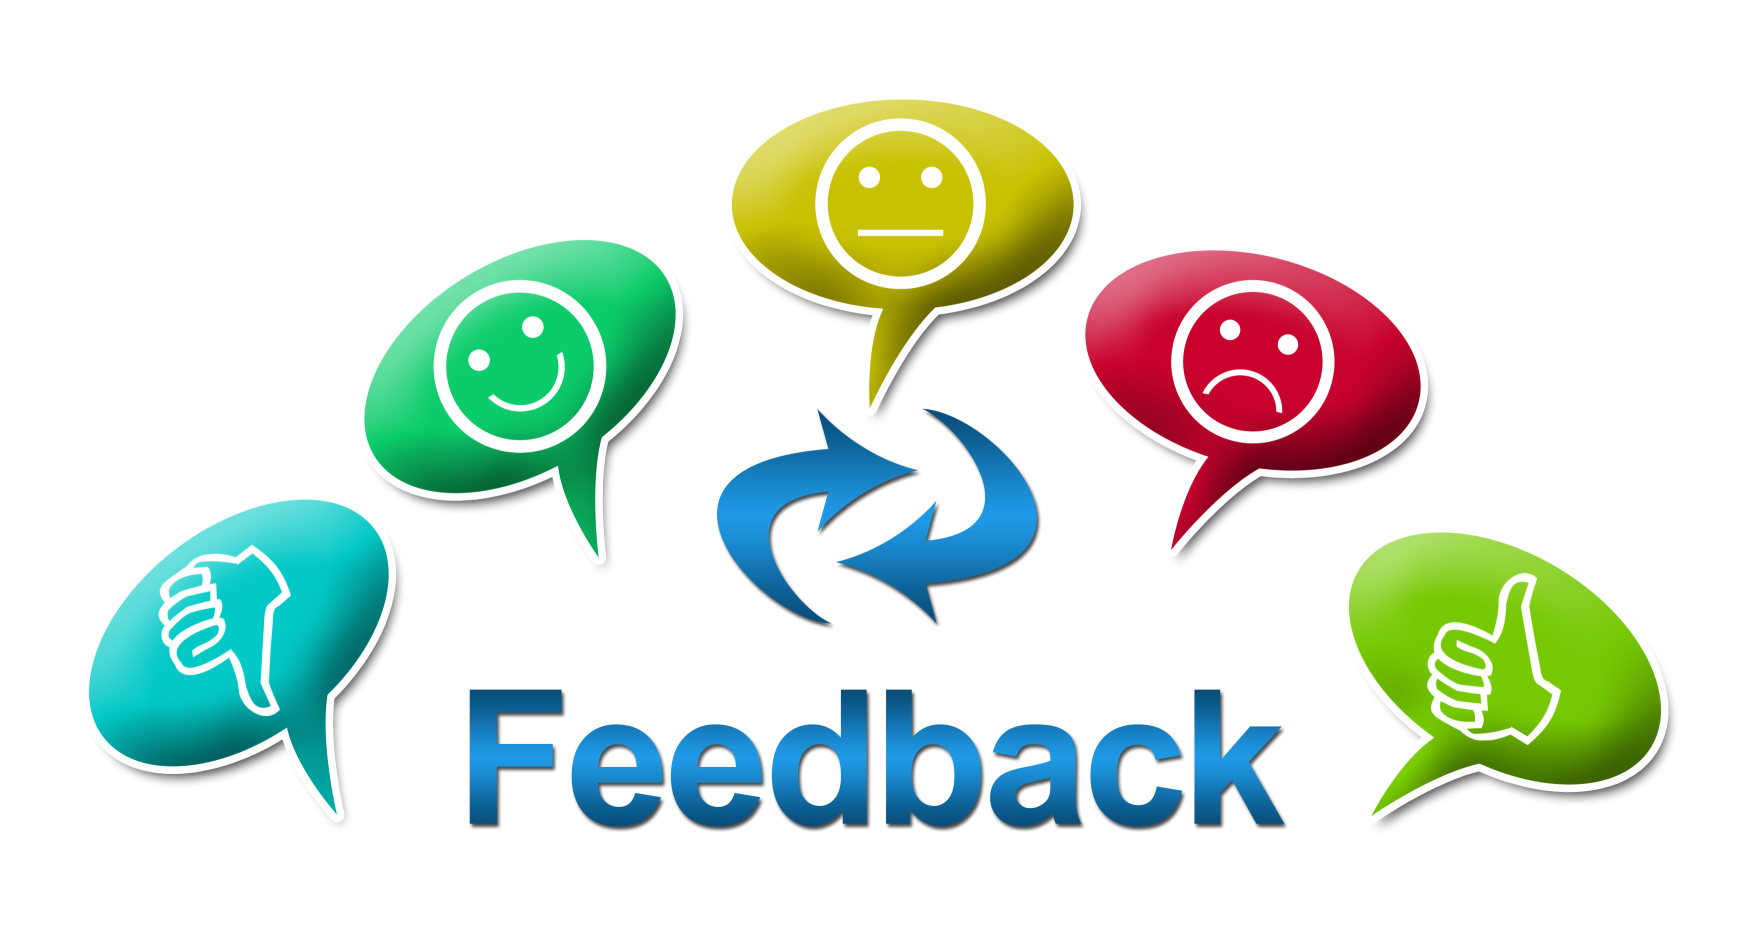 Does the feedback of your customers matter to you? It should!